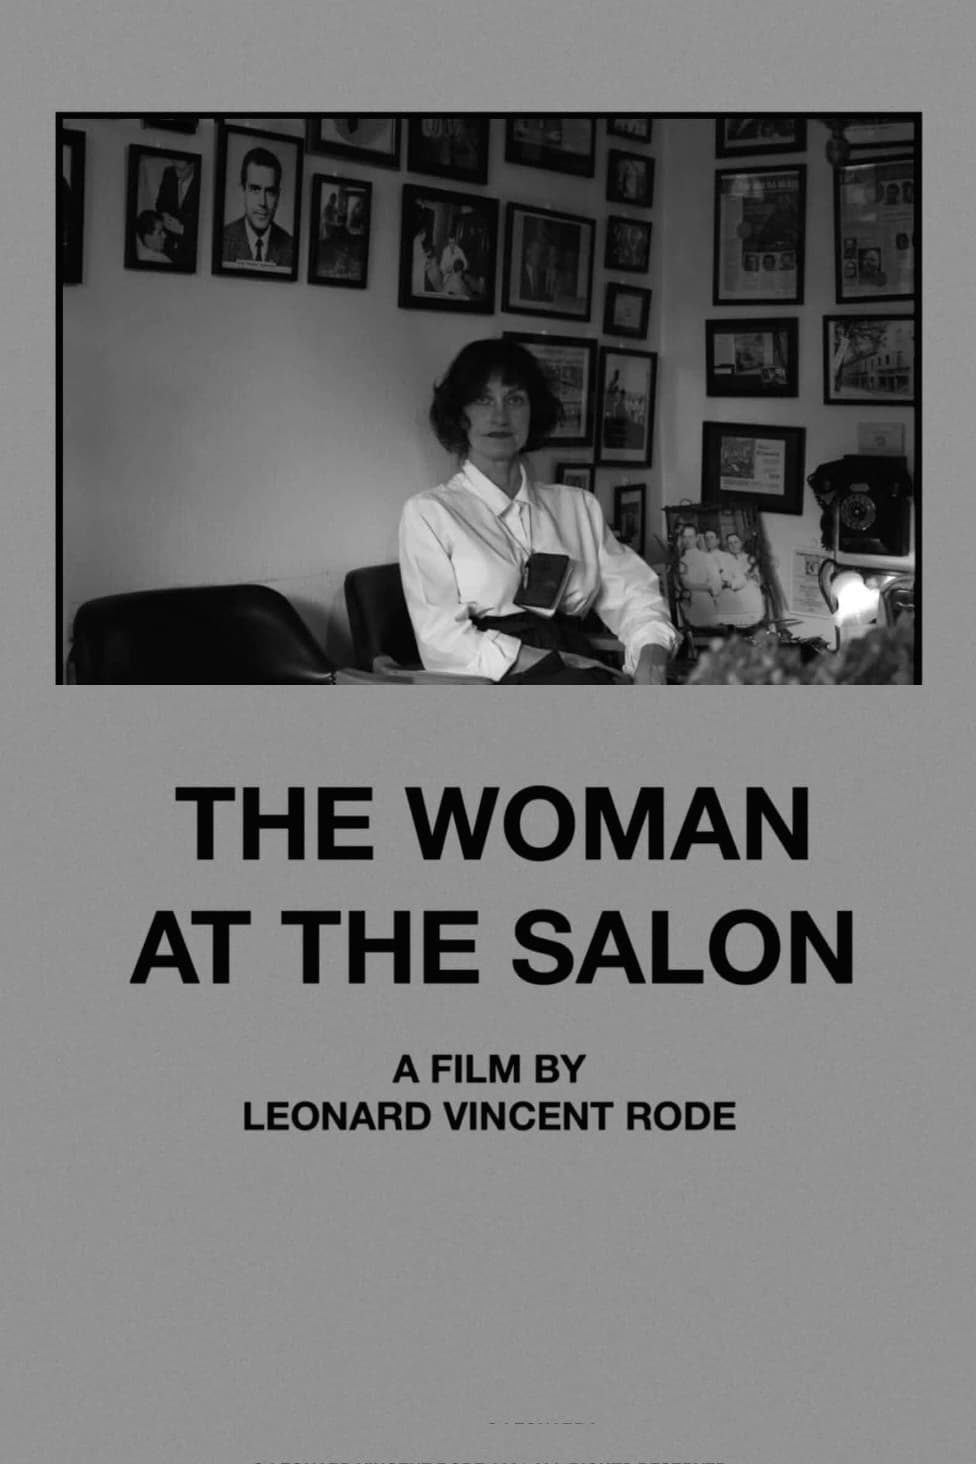 The Woman at the Salon